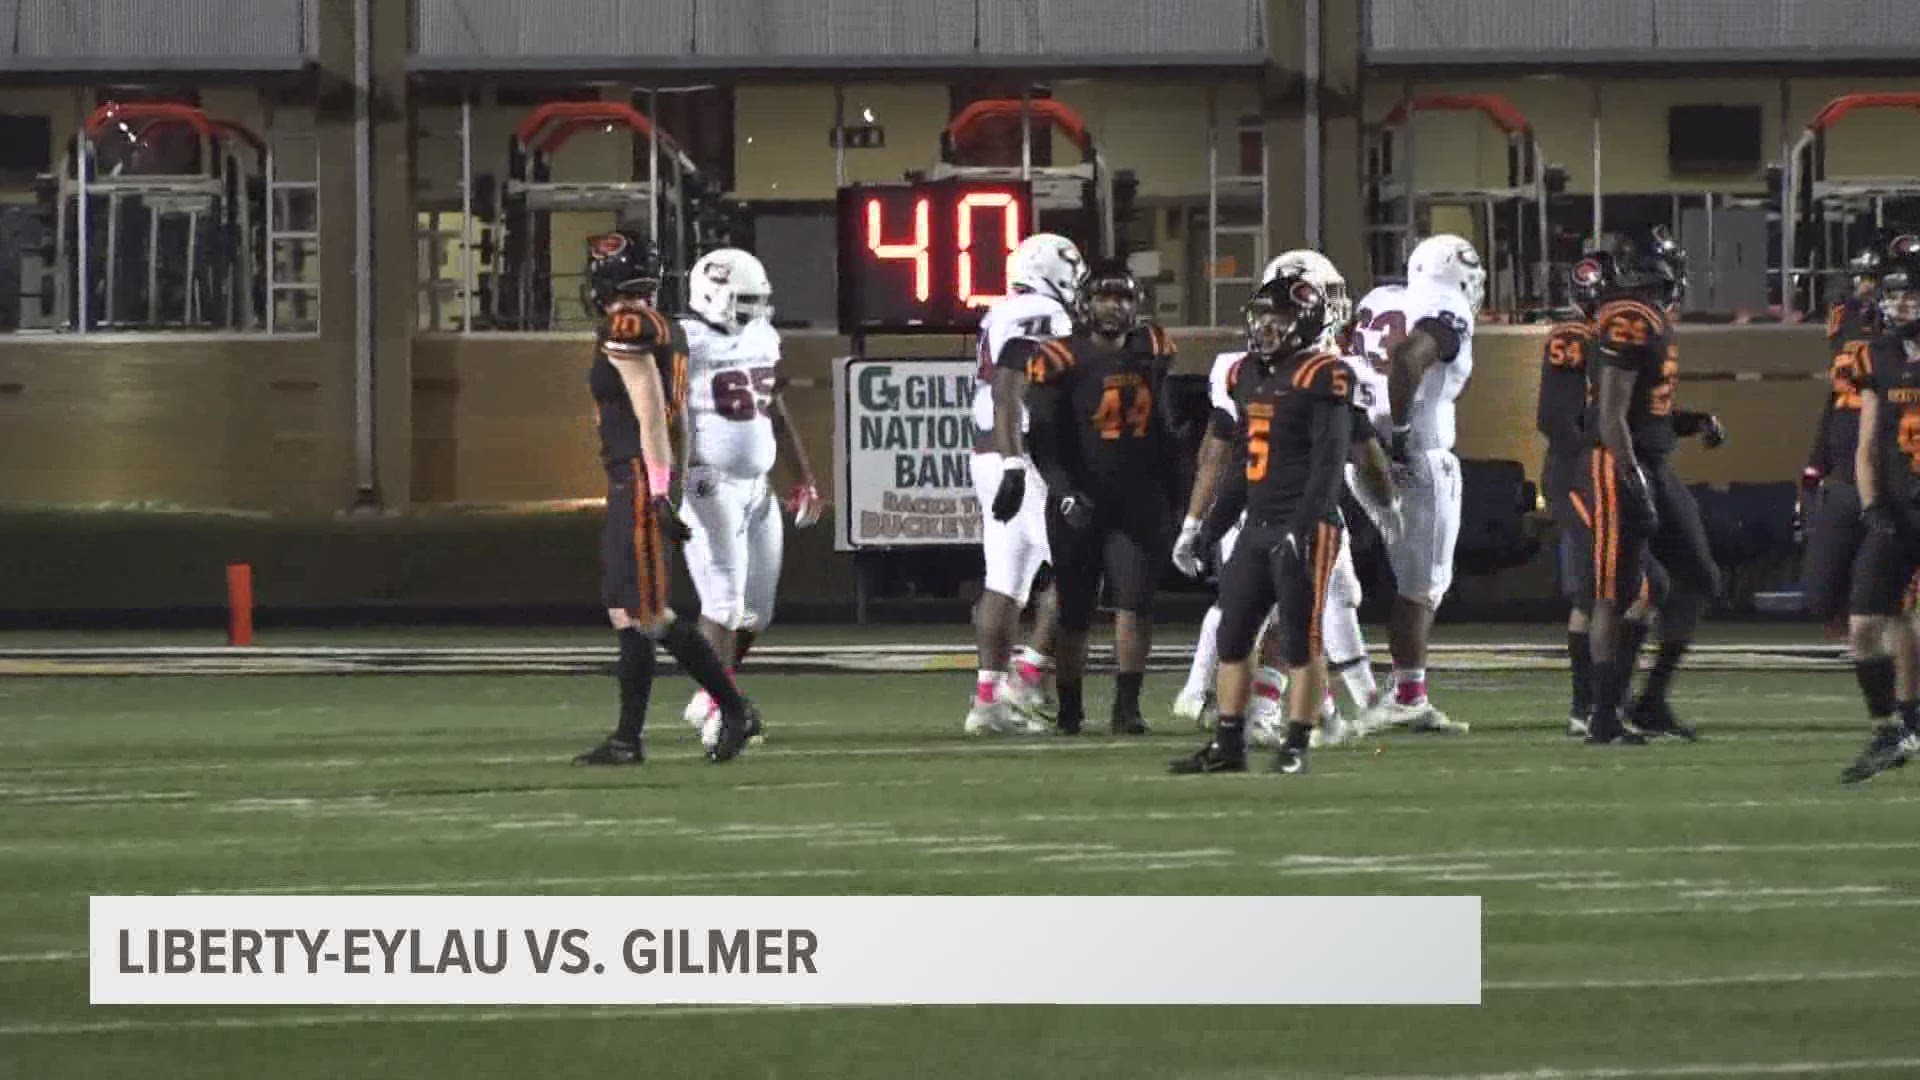 GIlmer came away with the win, topping Liberty-Eylau 35-14.